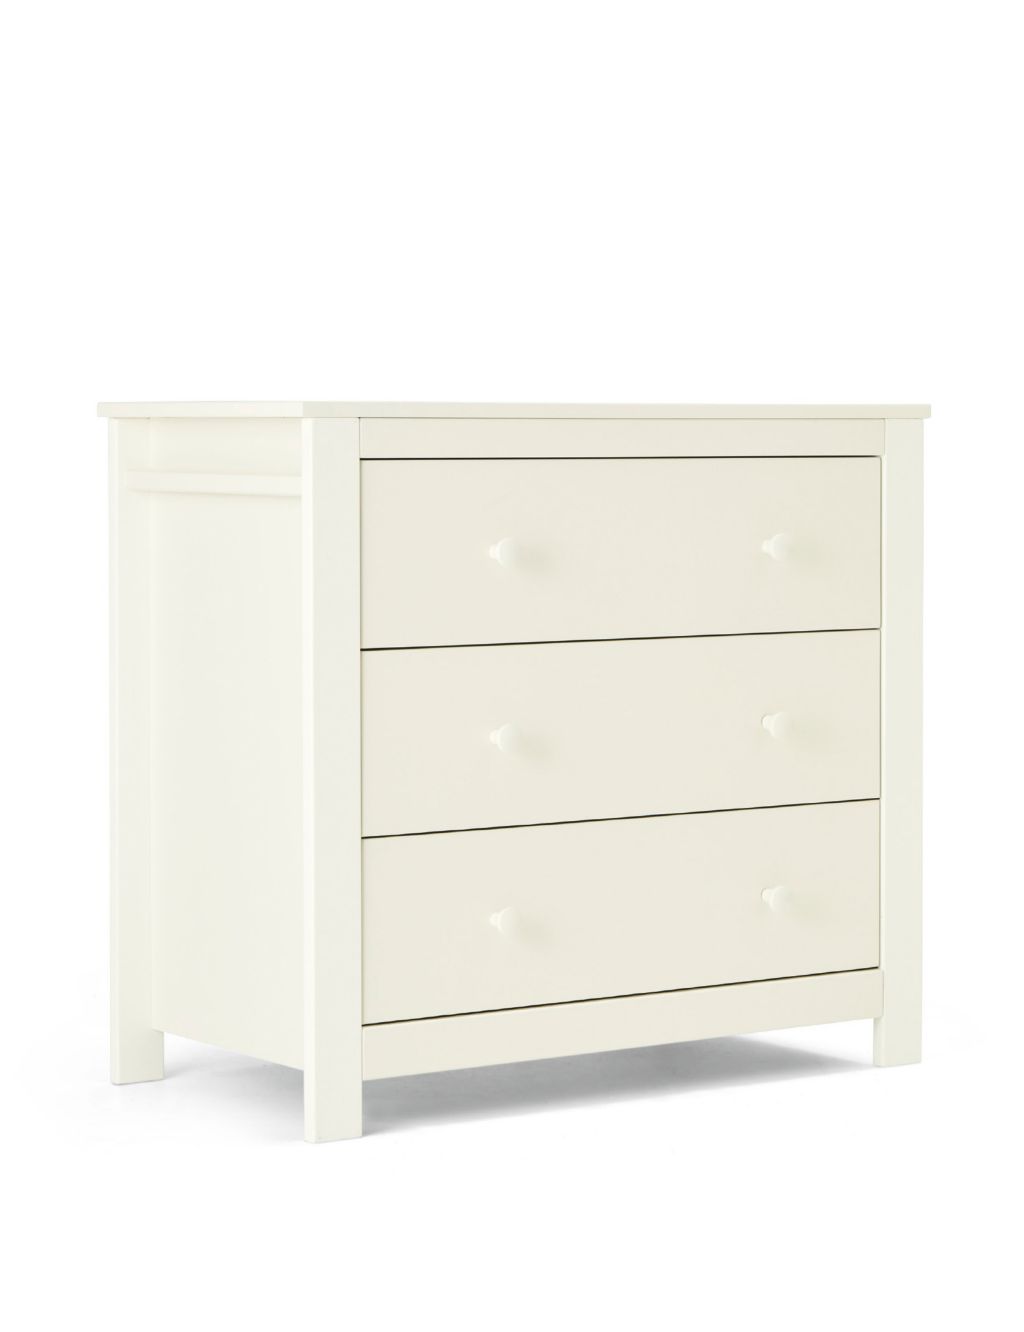 Mia 2 Piece Cotbed Set with Dresser image 6